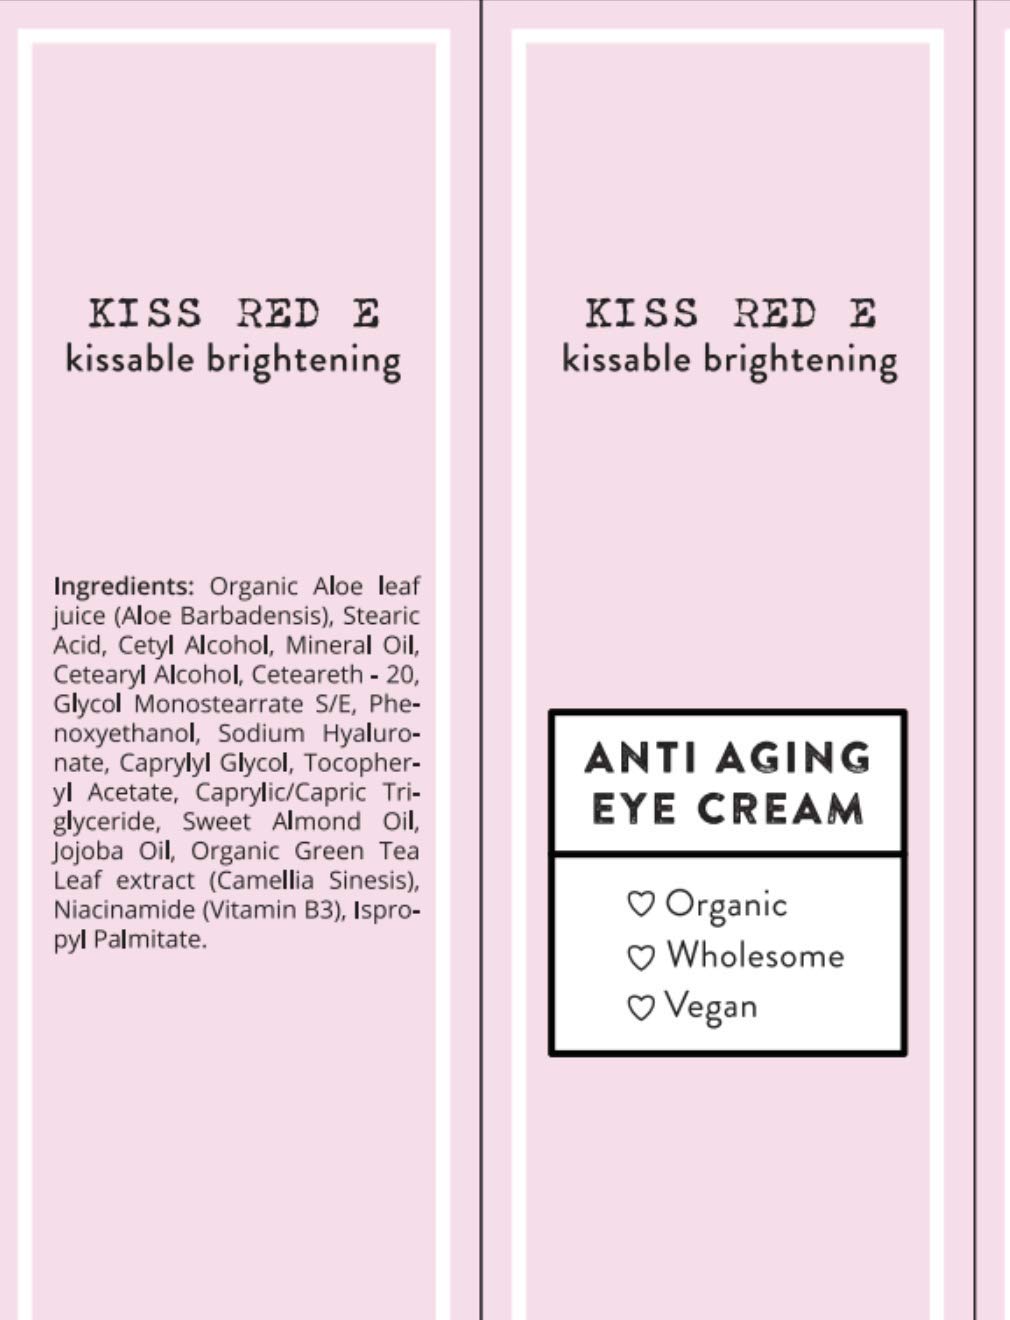 KissRedE Anti-Aging Eye Cream for Dark Circles, Puffiness, Fine Lines, and Wrinkles - Fragrance-Free, 1 Fl Oz